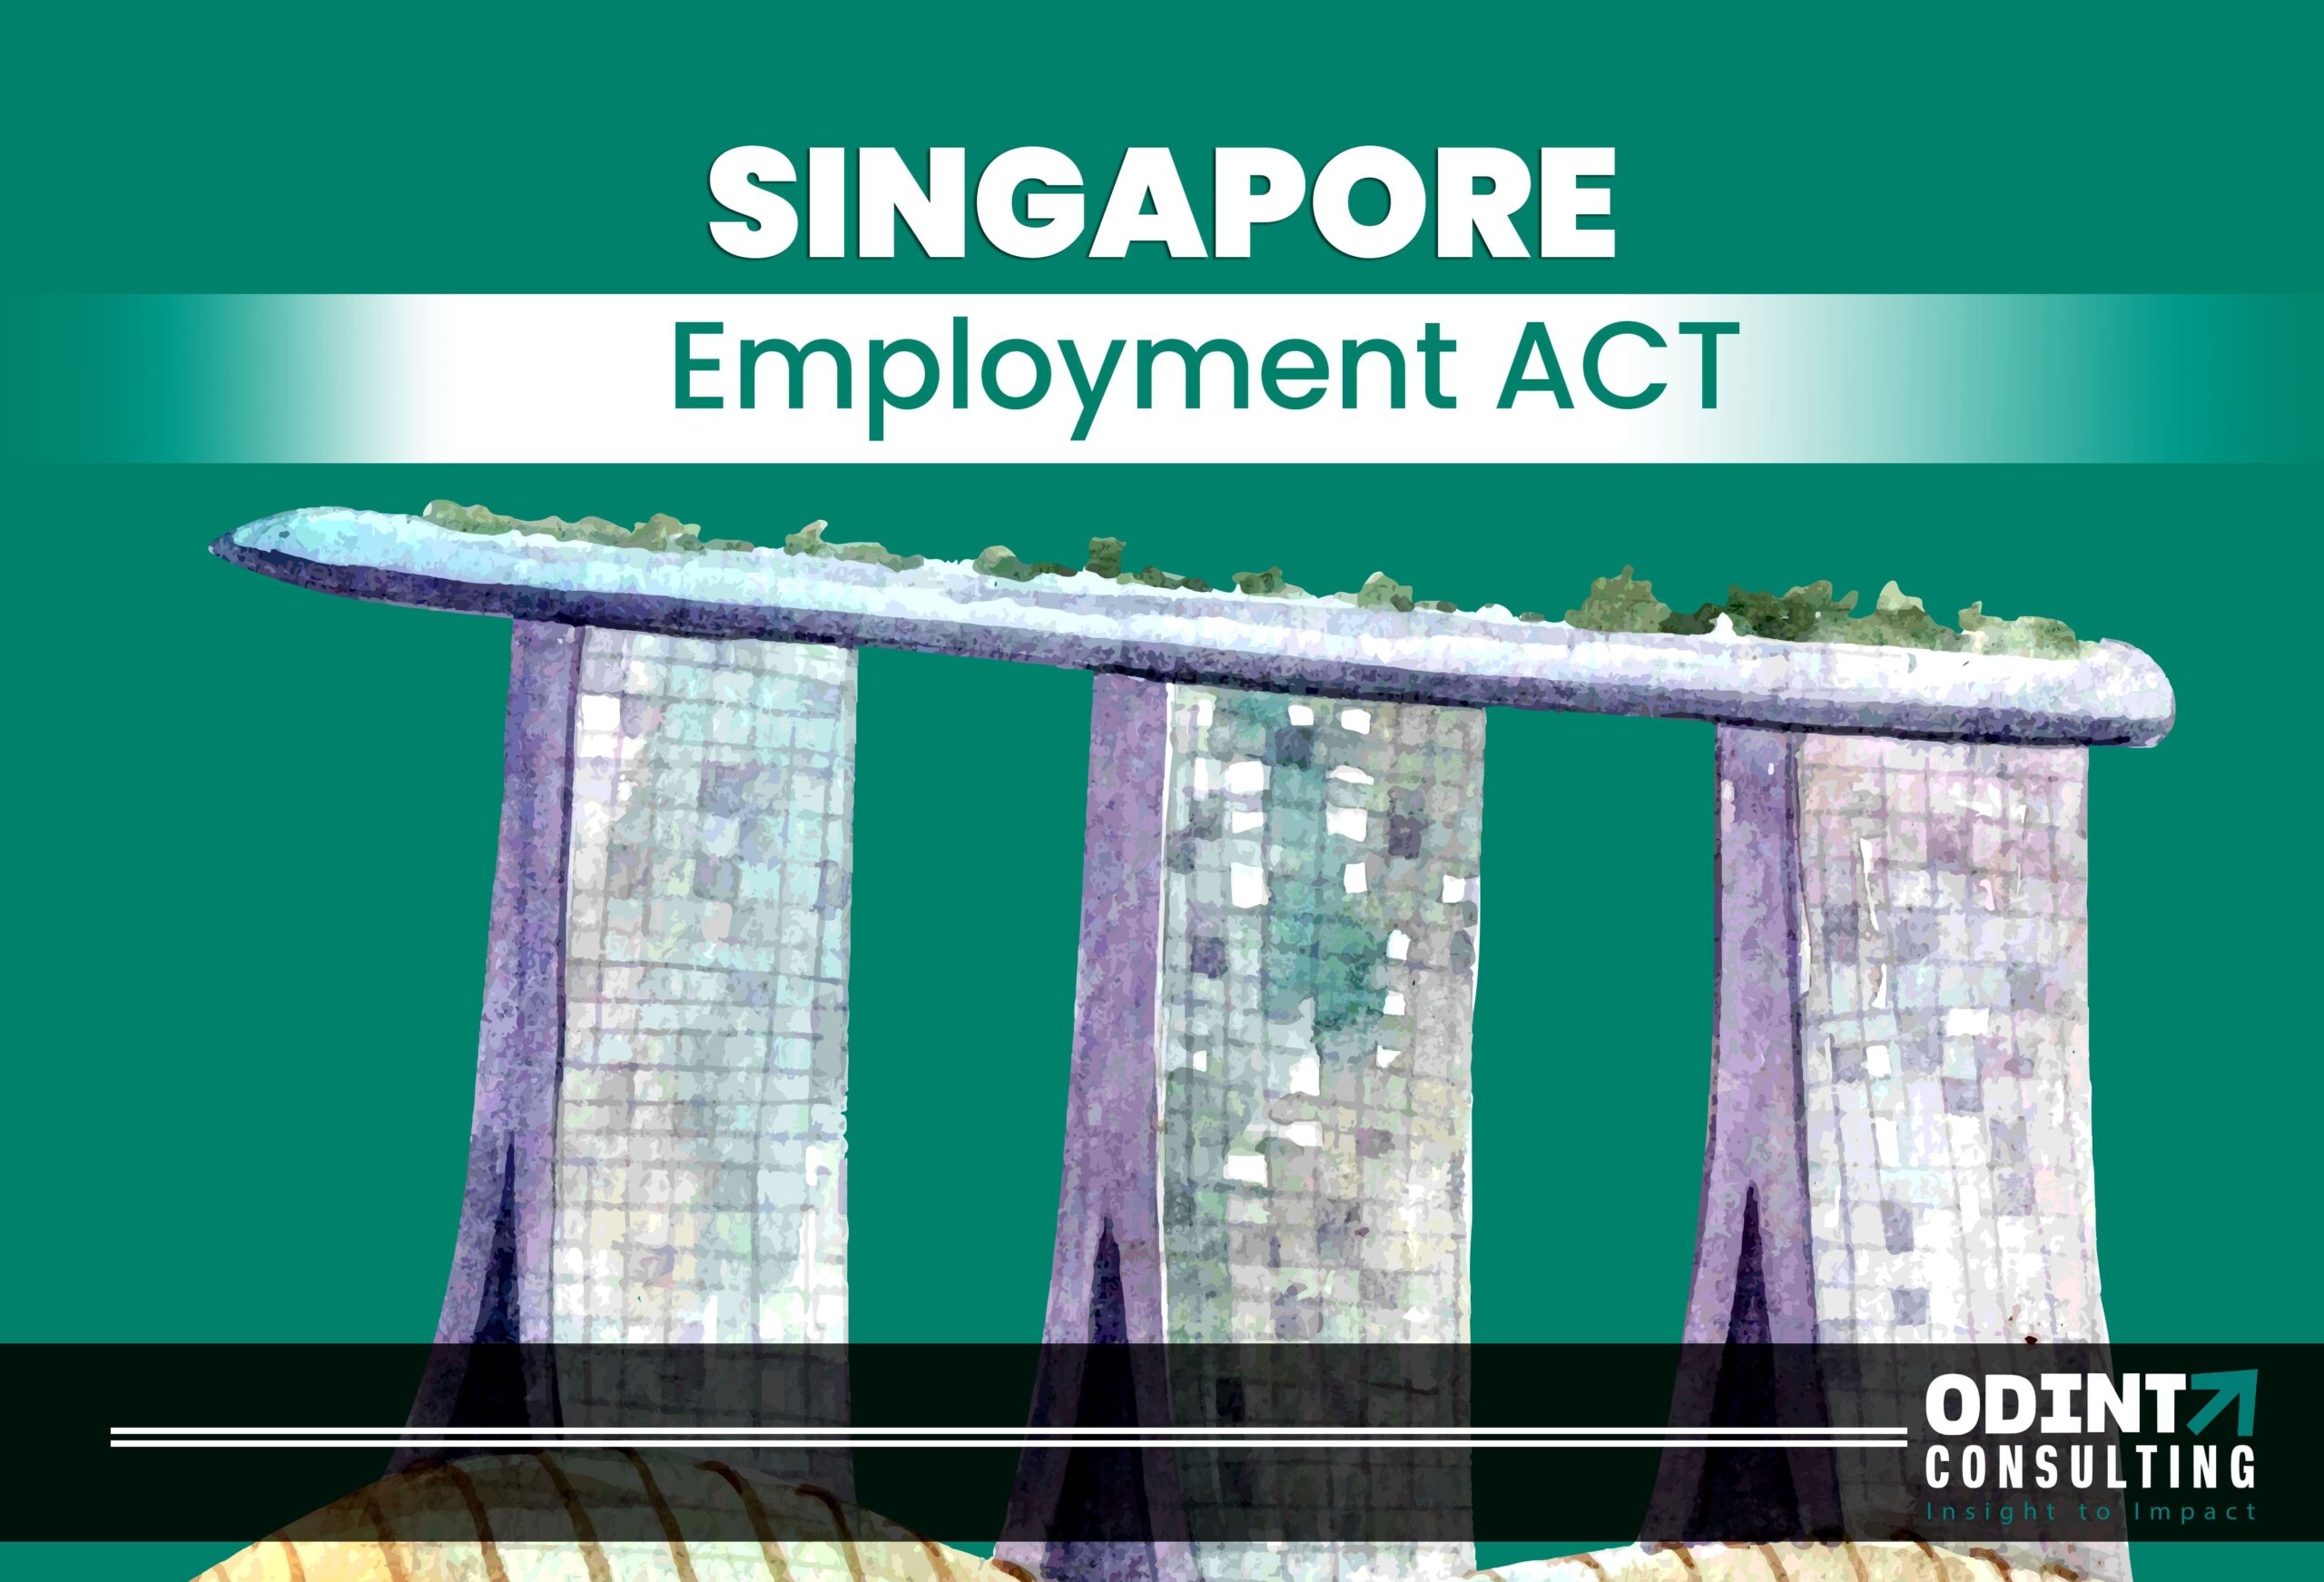 Singapore Employment ACT – Applicability, Contract, & Policies